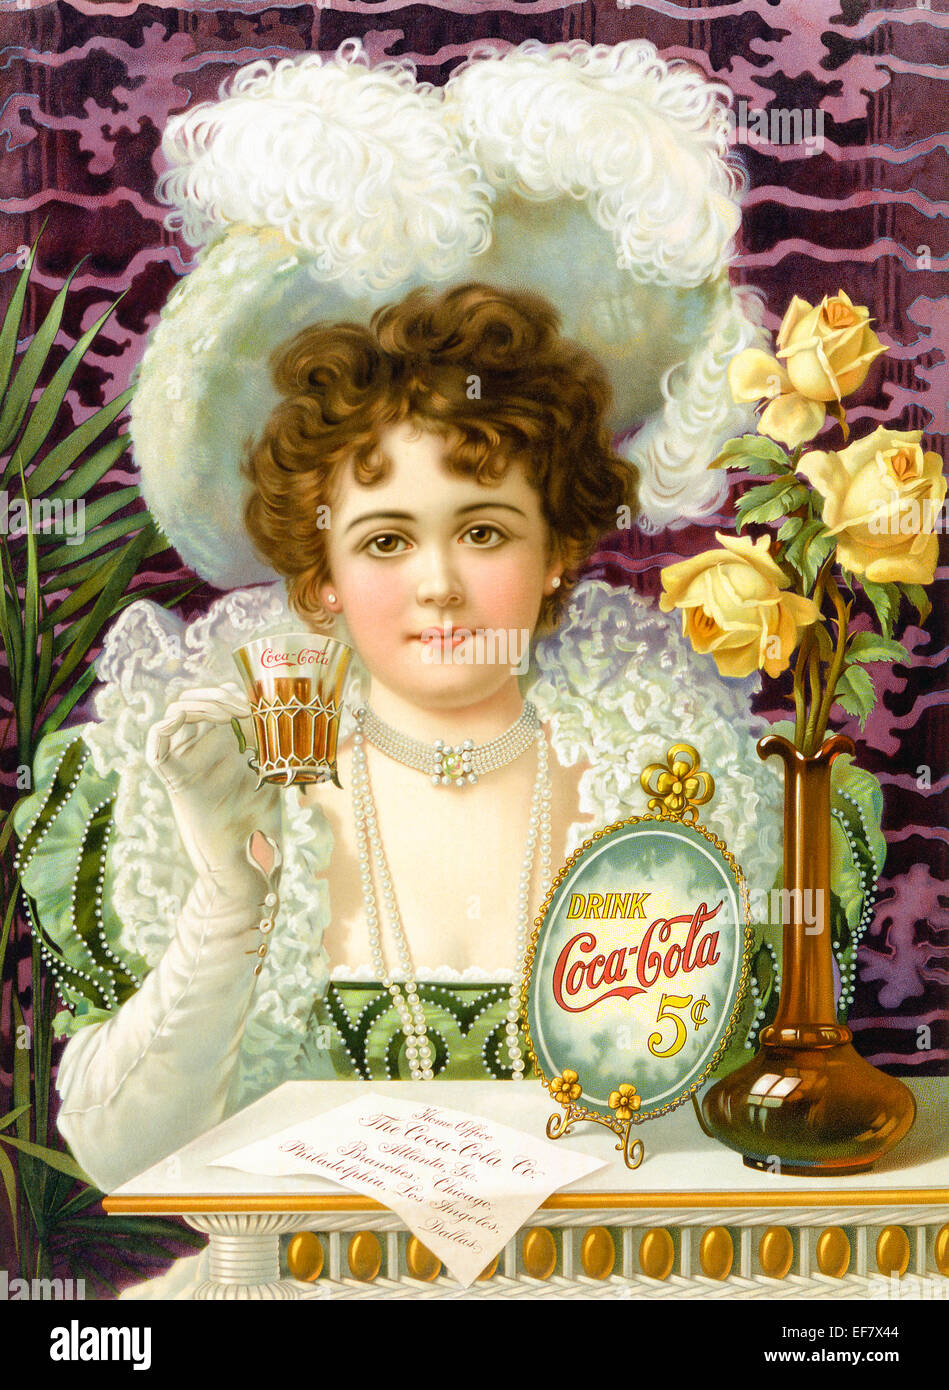 'Drink Coca-Cola 5¢' 1899 Coca-Cola advertisement featuring Hilda Clark (1872-1932) who appeared in various adverts between 1899-1903. At the time Coca-Cola contained cocaine (coca) as well as caffeine from kola nuts. See description for more information. Stock Photo